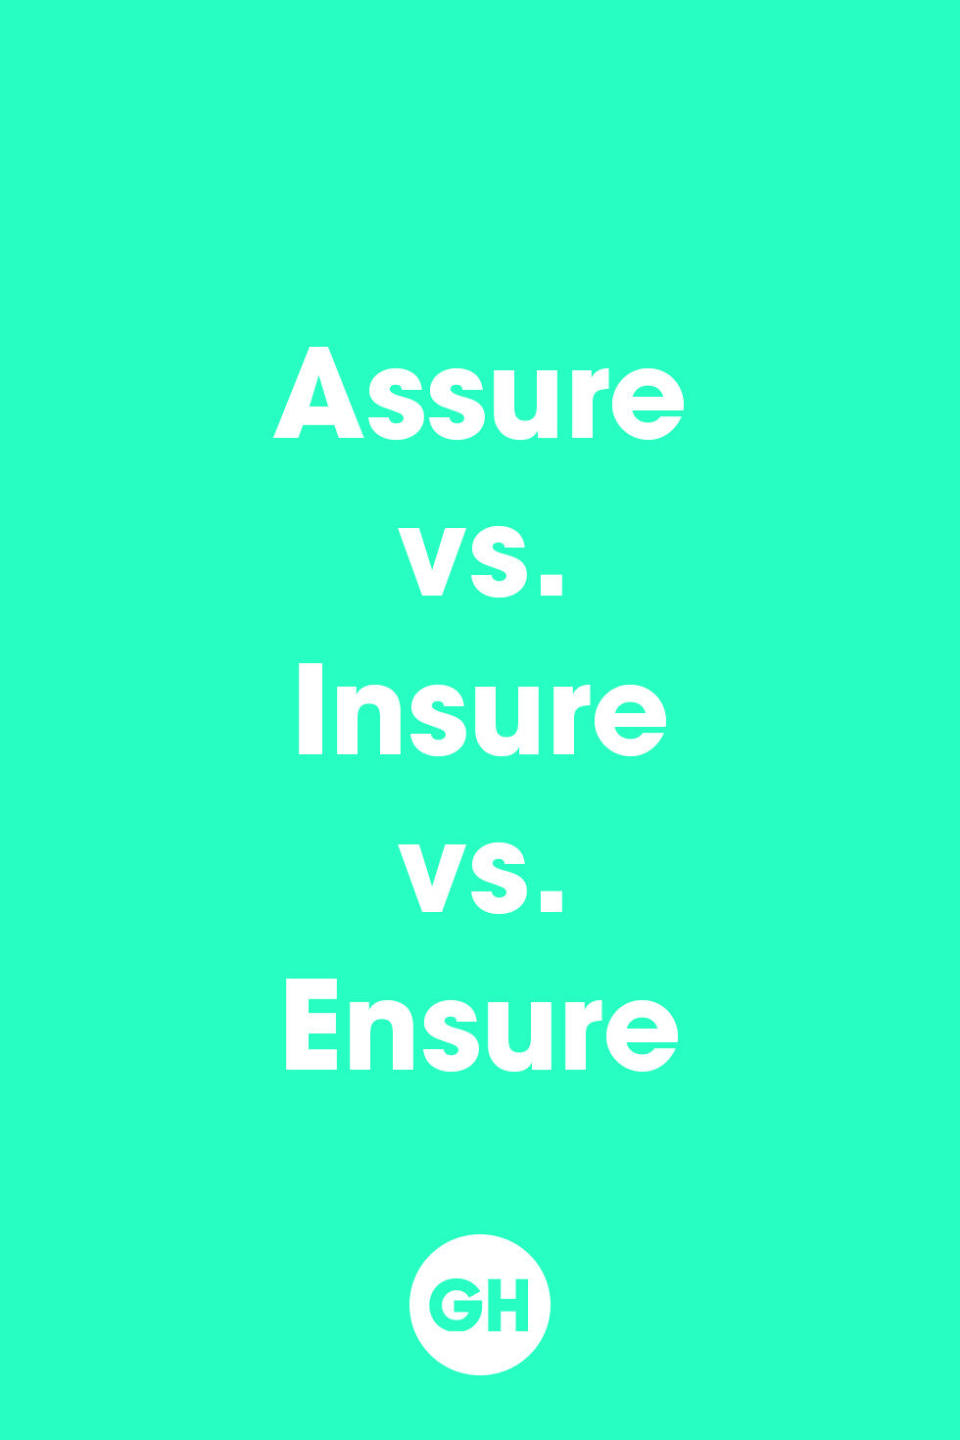 <p>Assure means to promise, insure means to protect against and ensure means to make certain. So: Please ensure that your house is insured or you may have bigger issues than common grammar mistakes. I assure you, it's worth your while. </p>